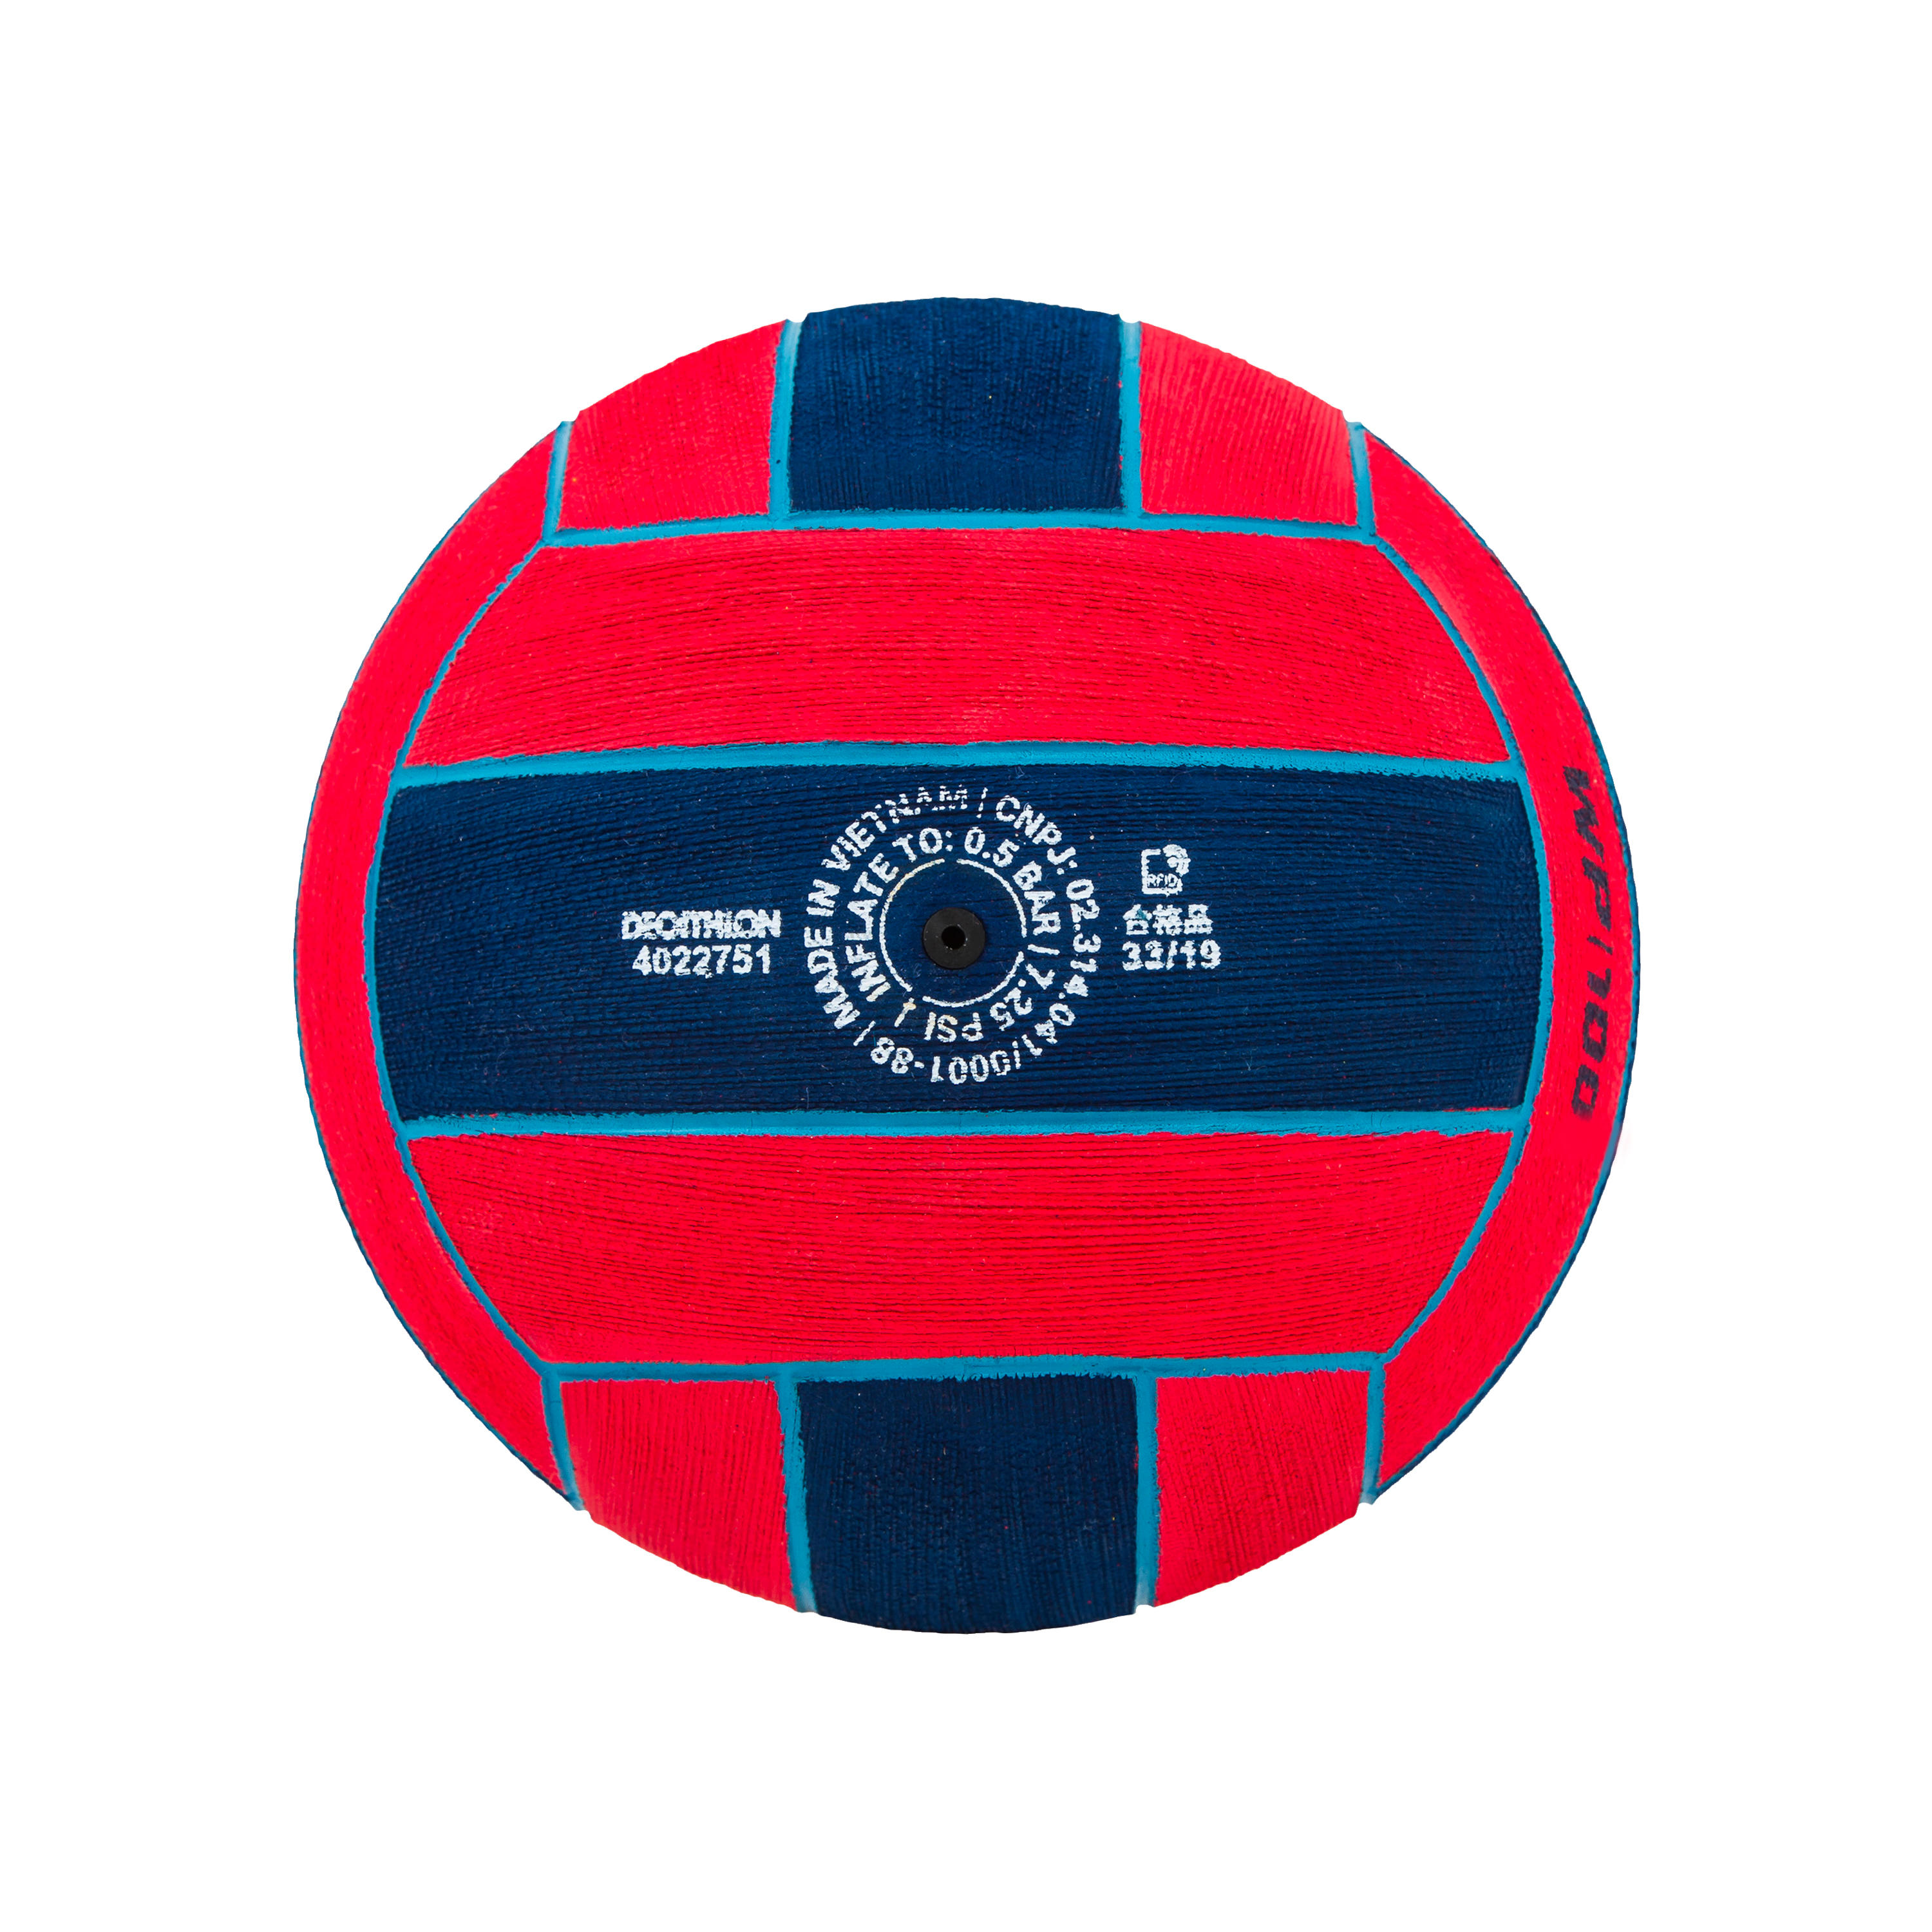 WATER POLO BALL WP100 SIZE 2 - RED / BLUE 3/3